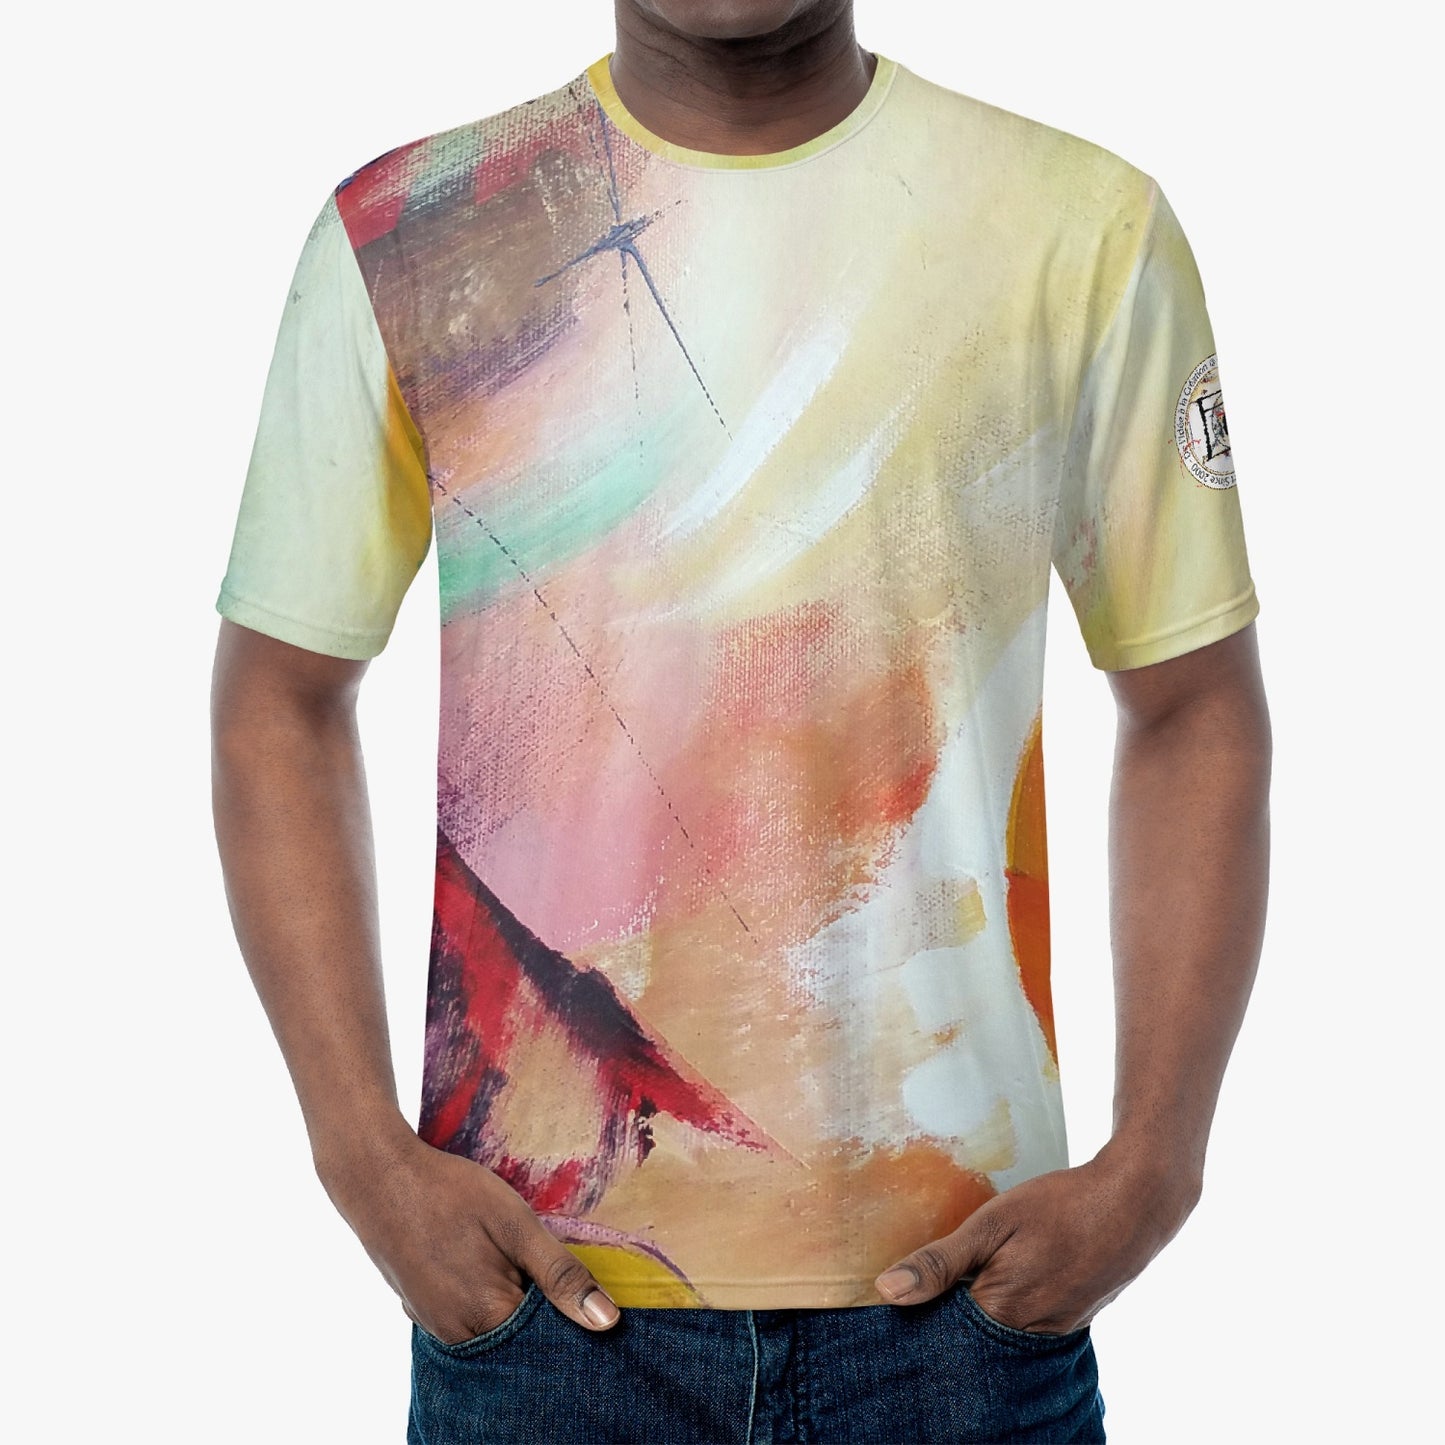 All-over "Shades" T-shirt